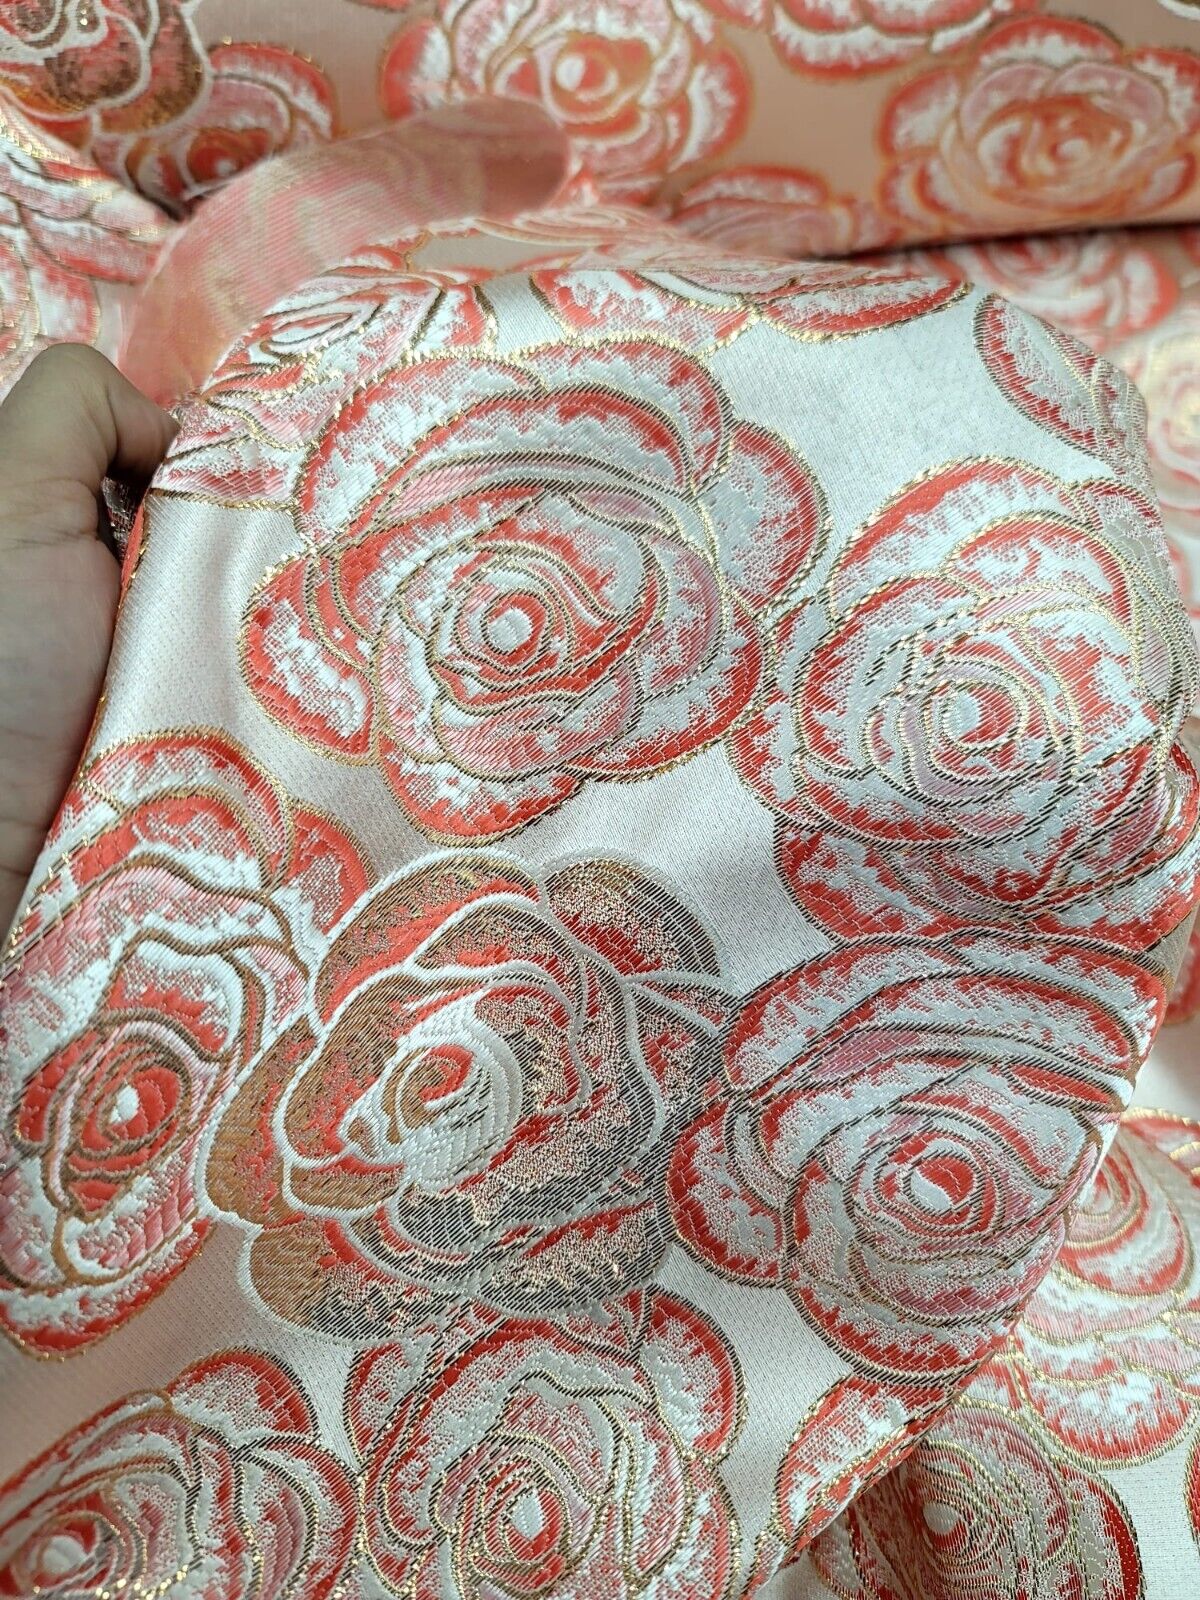 CORAL FLORAL BROCADE FABRIC SOLD BY THE YARD ACCENT GOLD FOR DRESS UPHOLSTERY